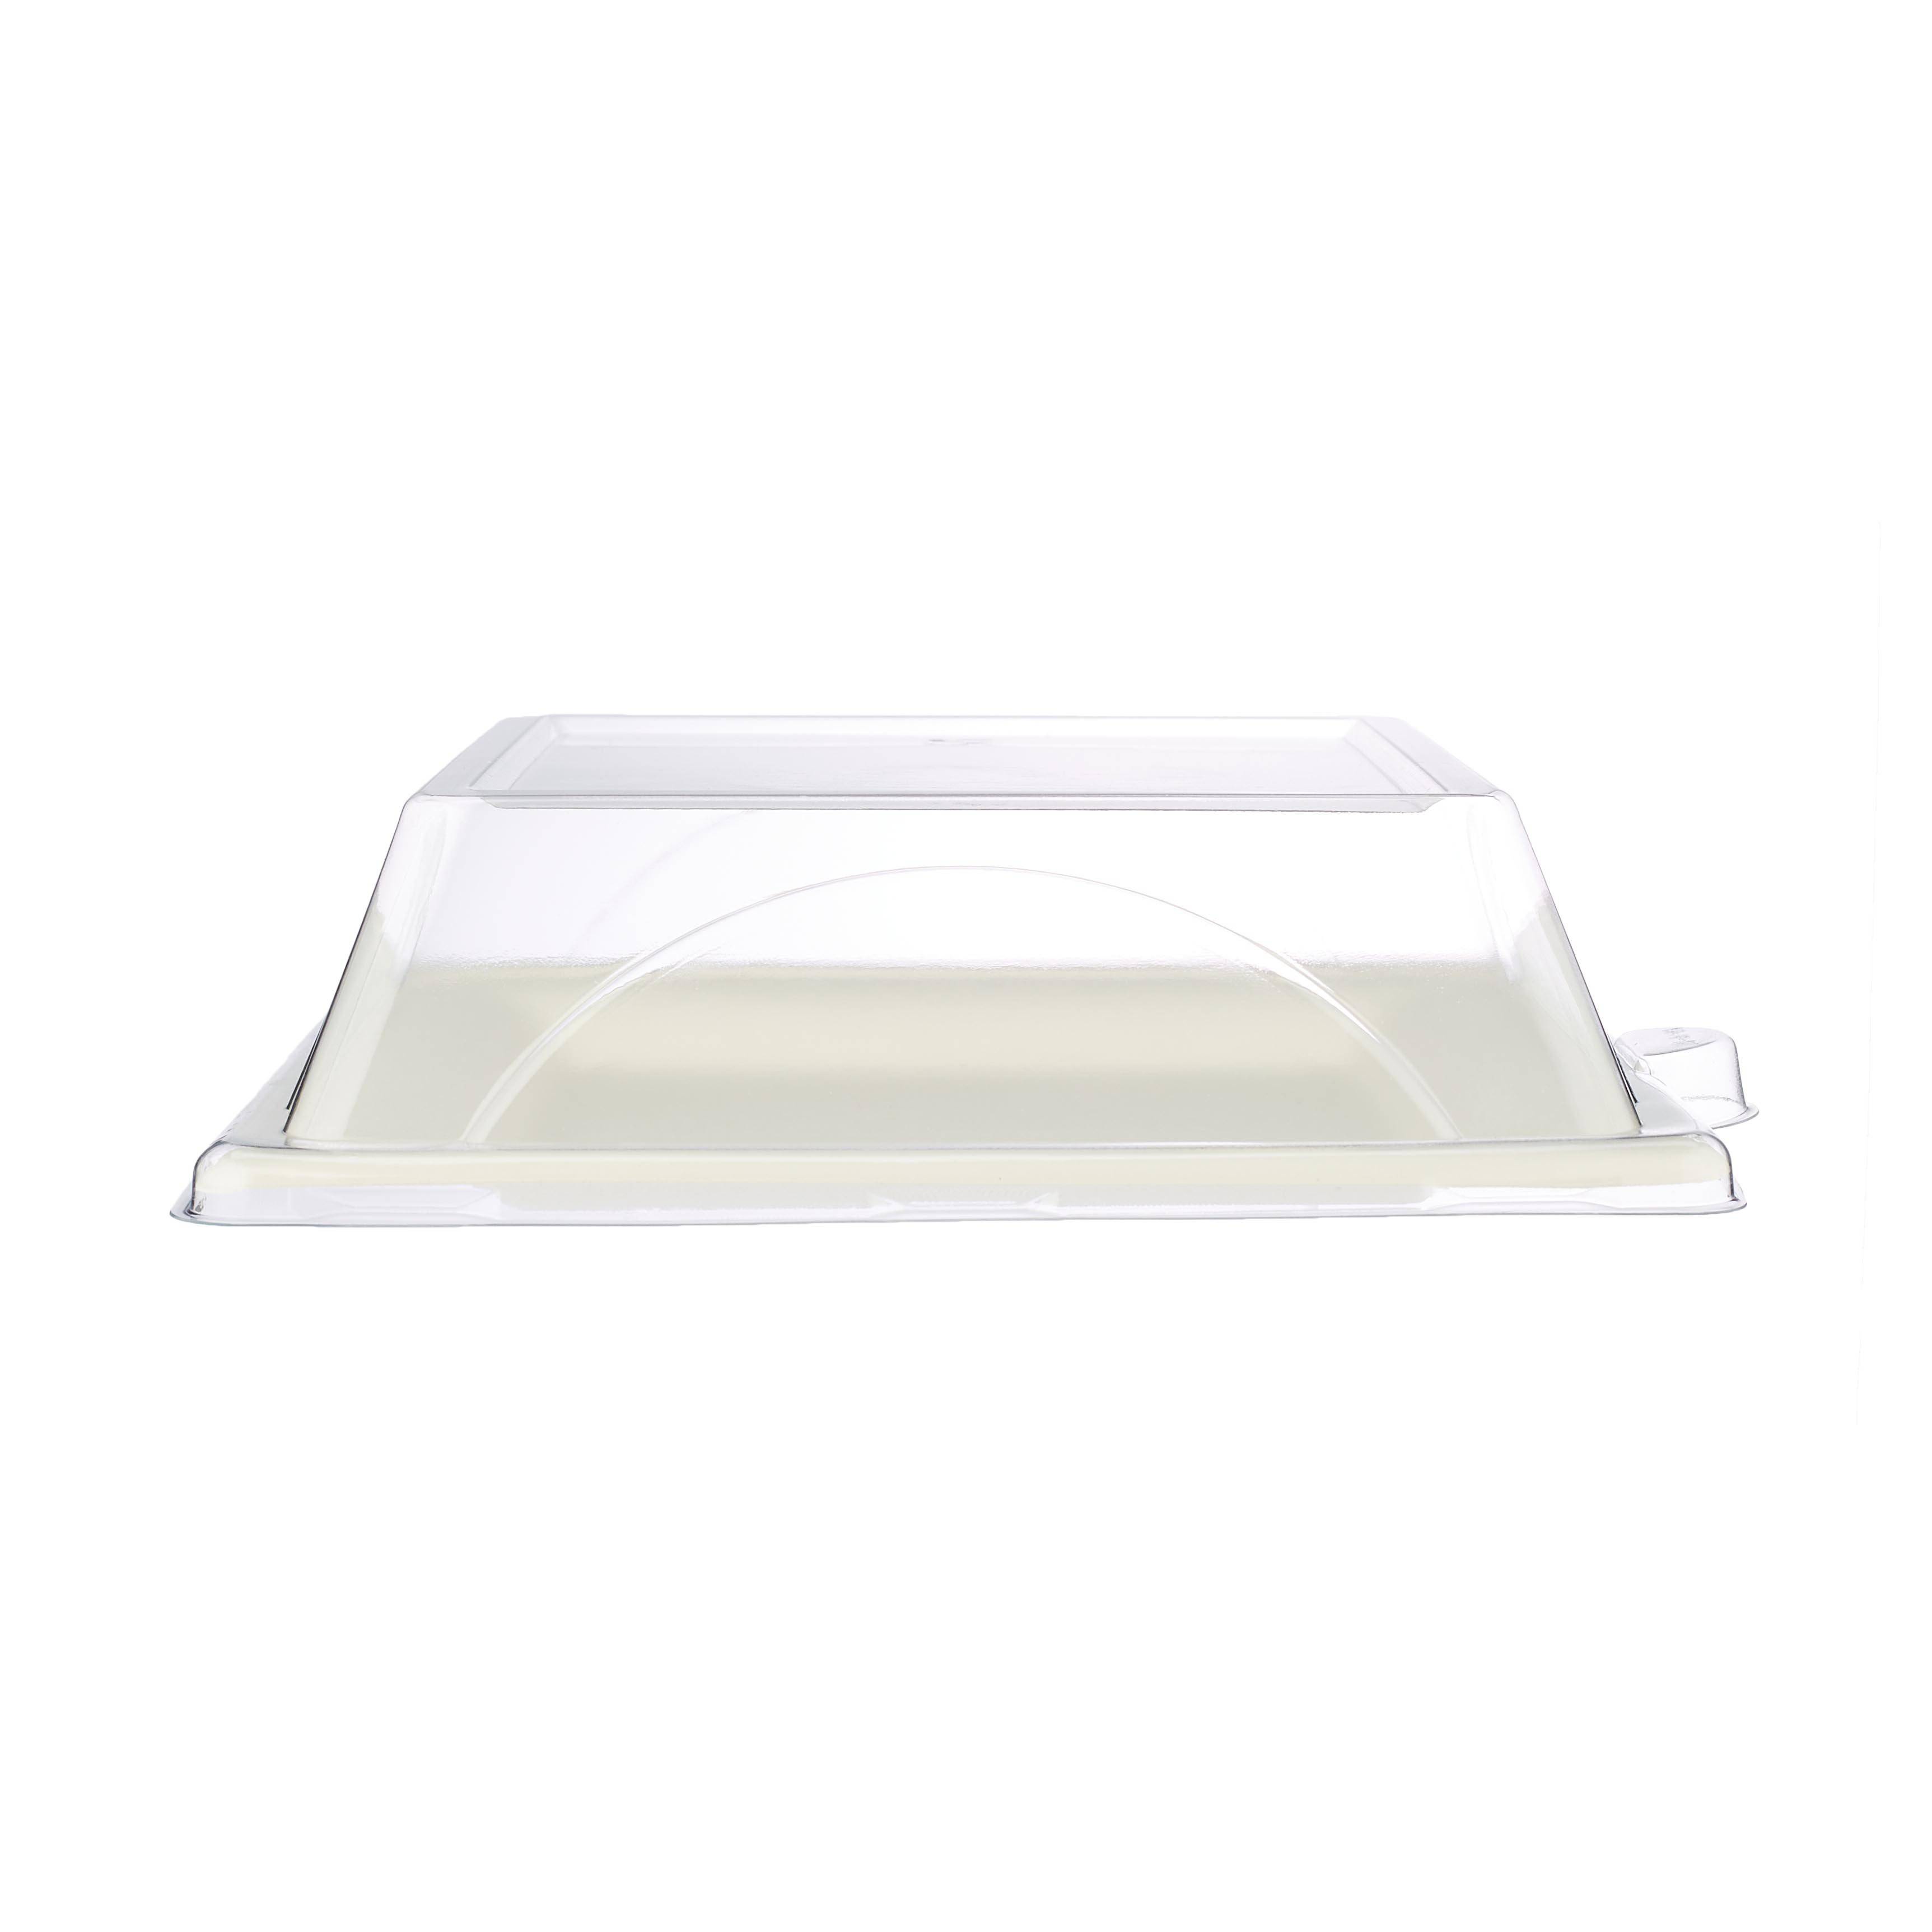 Bio-Degradable Square Plate With Lid 10 Inch 200 Pieces - Hotpack Global